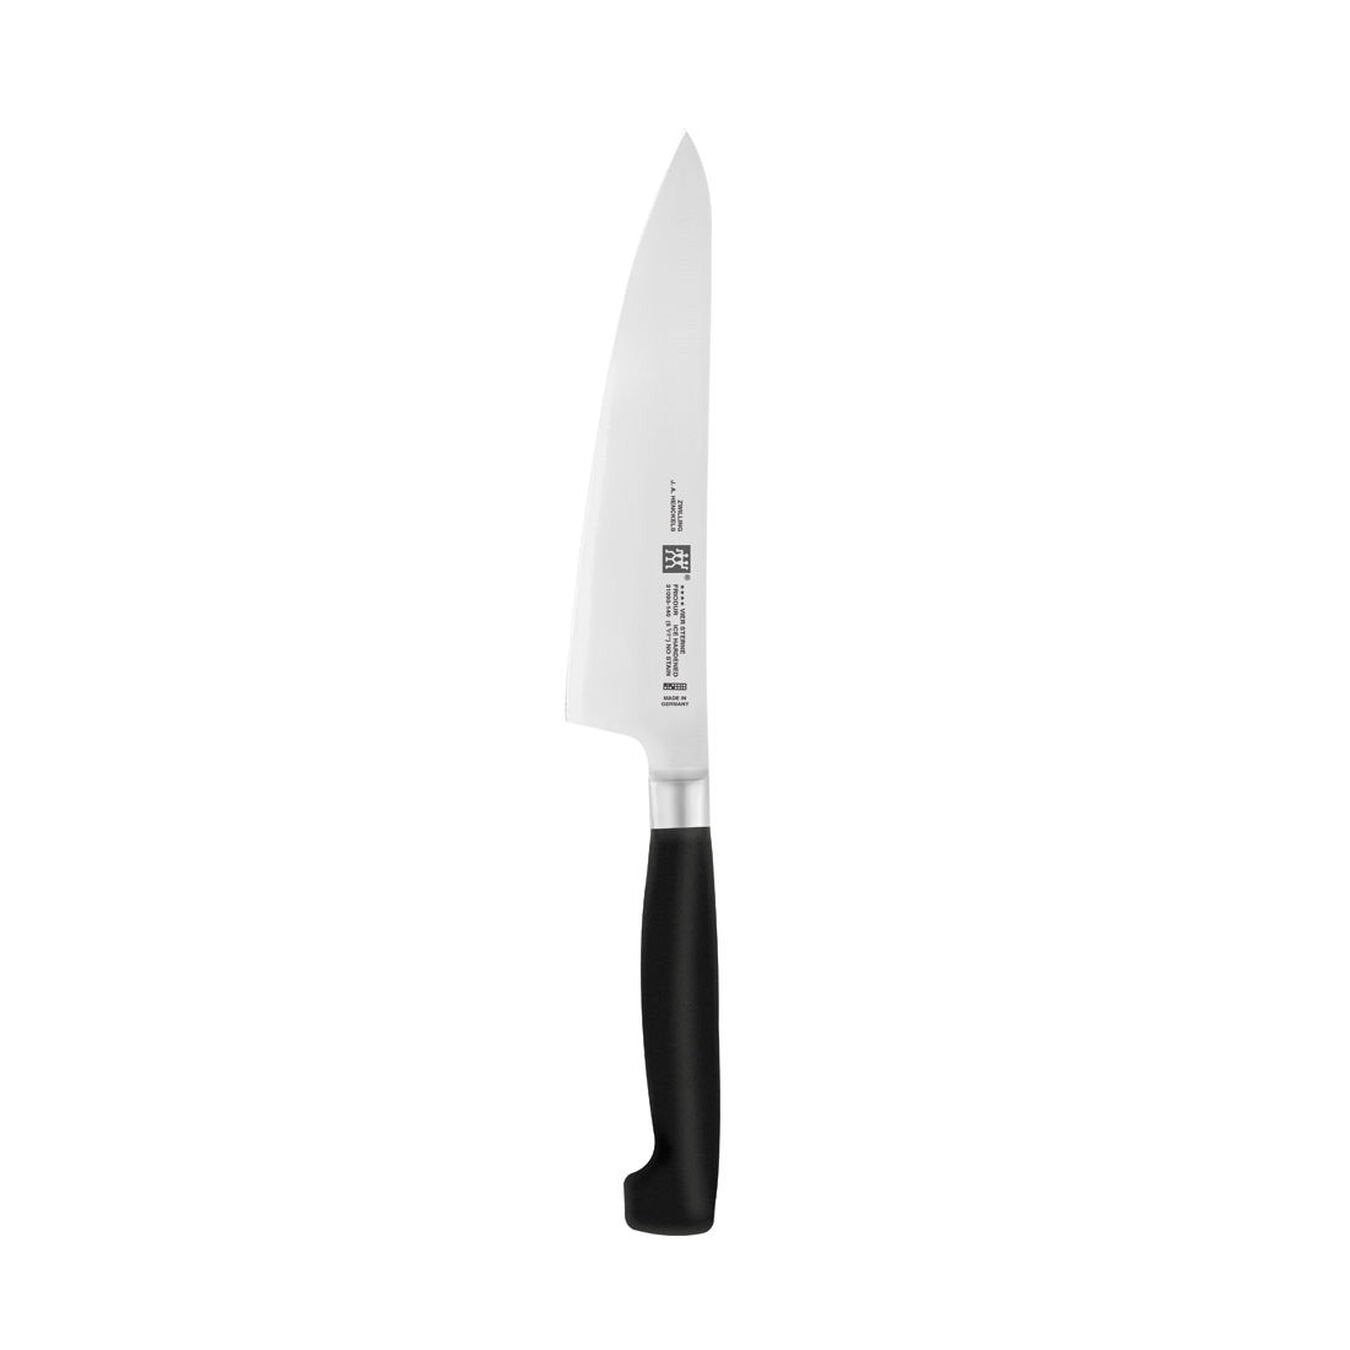 larger kitchen knife with black handle on white background